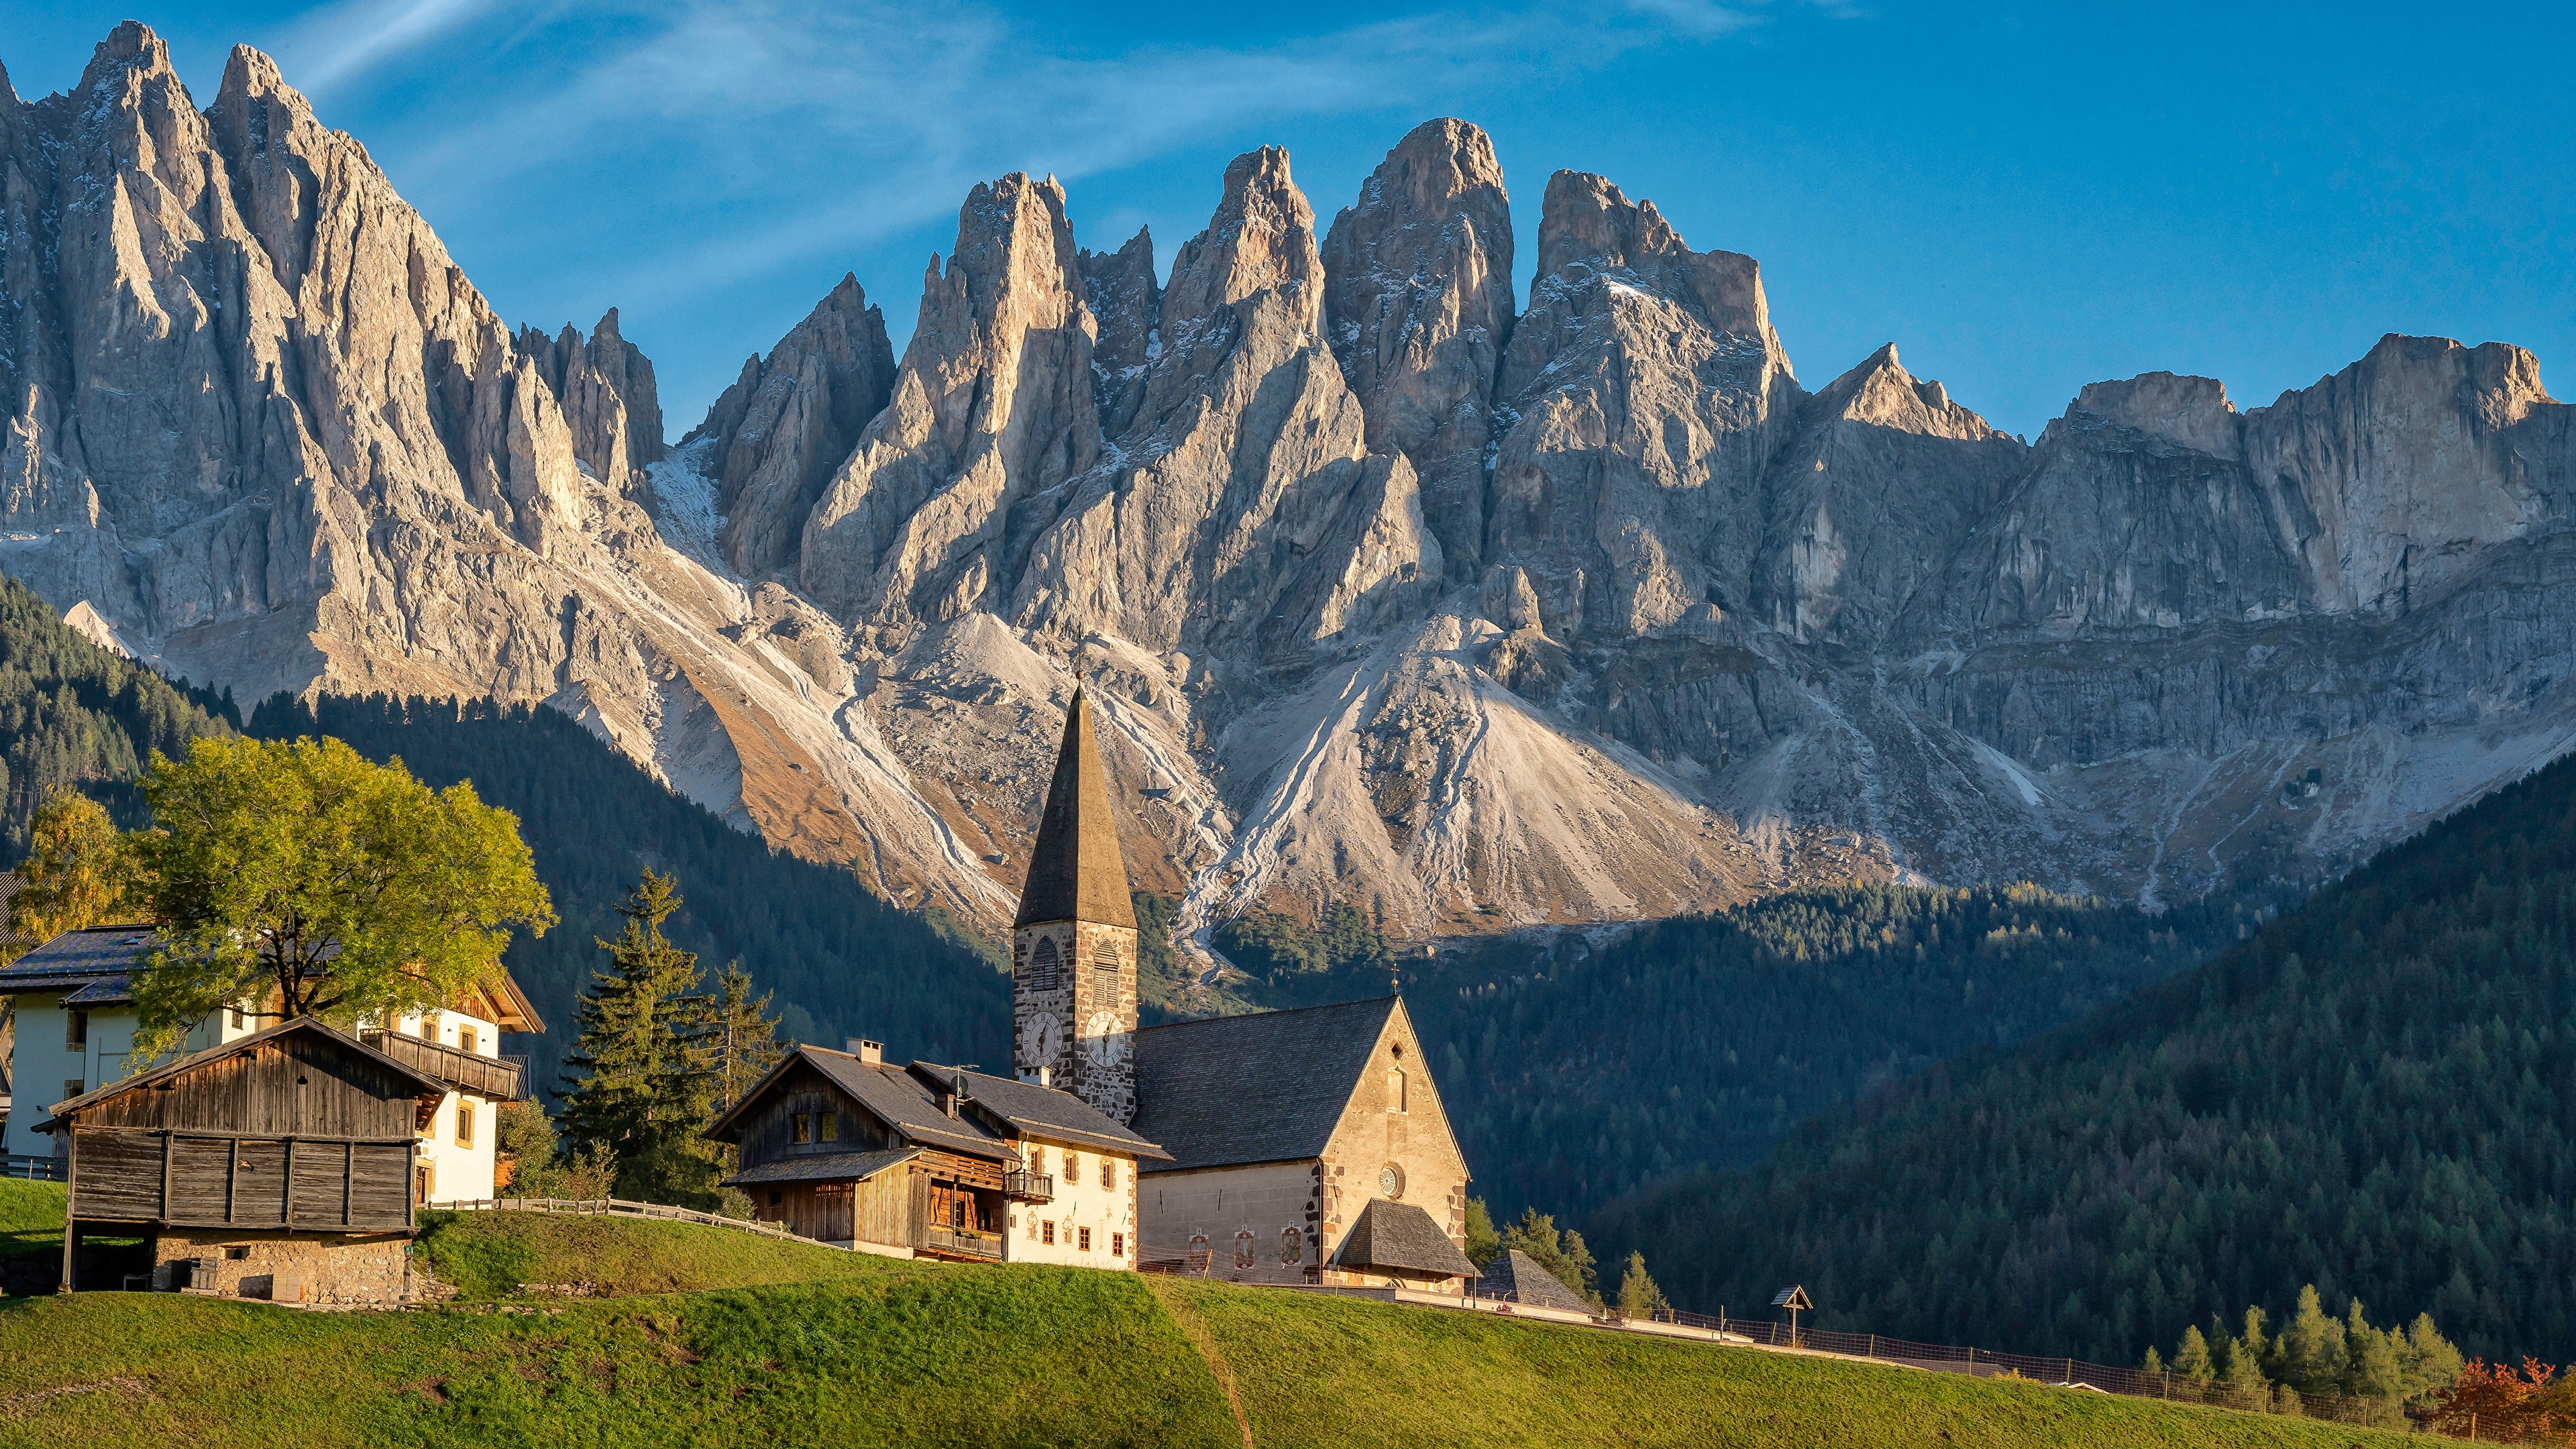 General 3840x2160 nature sky mountains forest landscape Italy Alps Dolomites Santa Magdalena